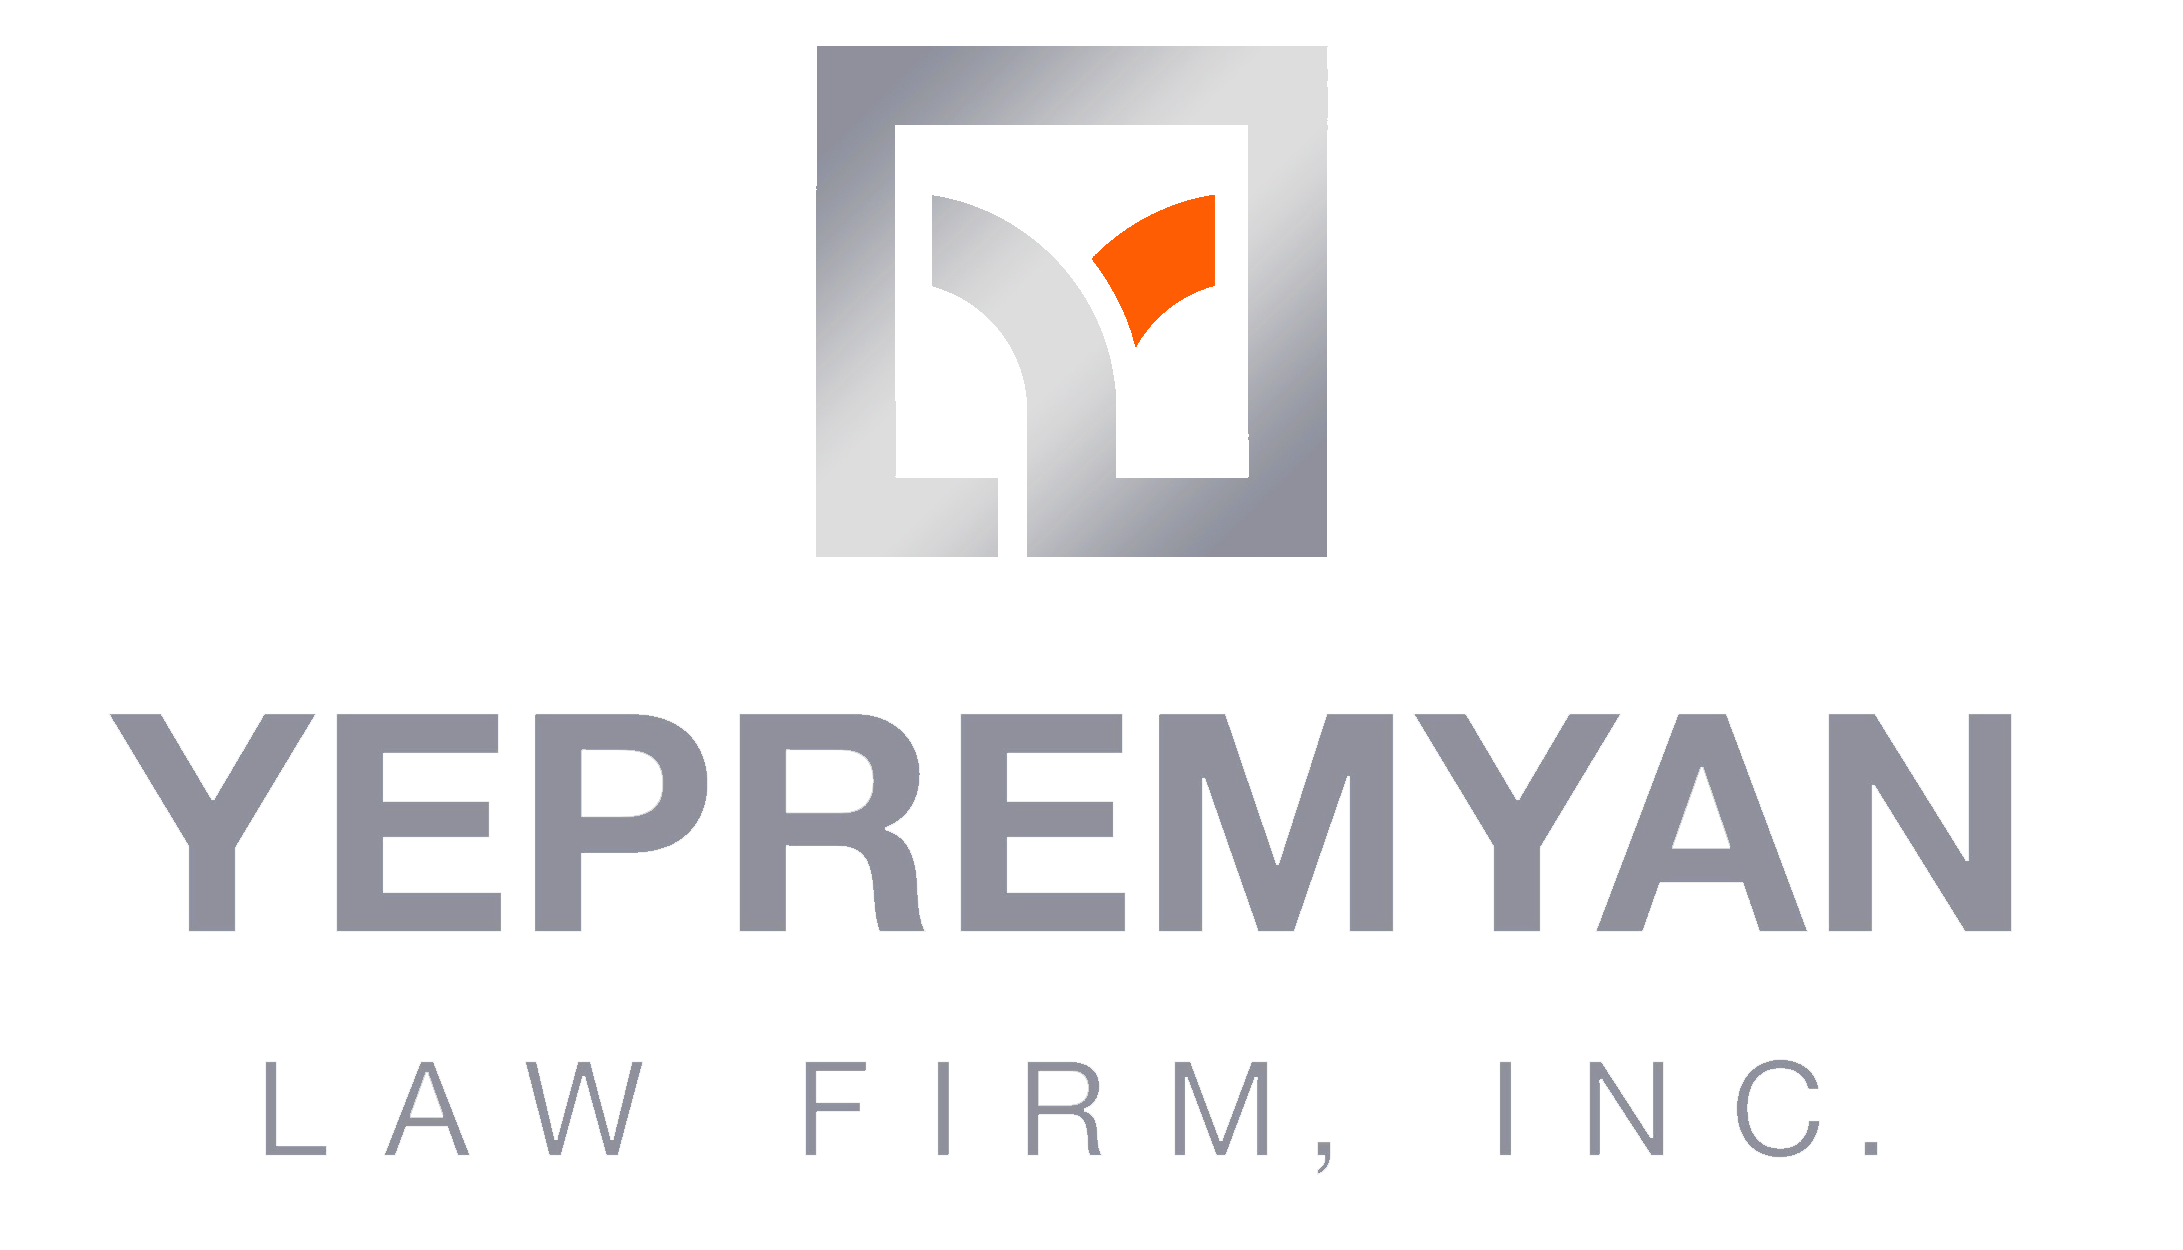 Personal Injury Attorney | Los Angeles | Yepremyan Law Firm